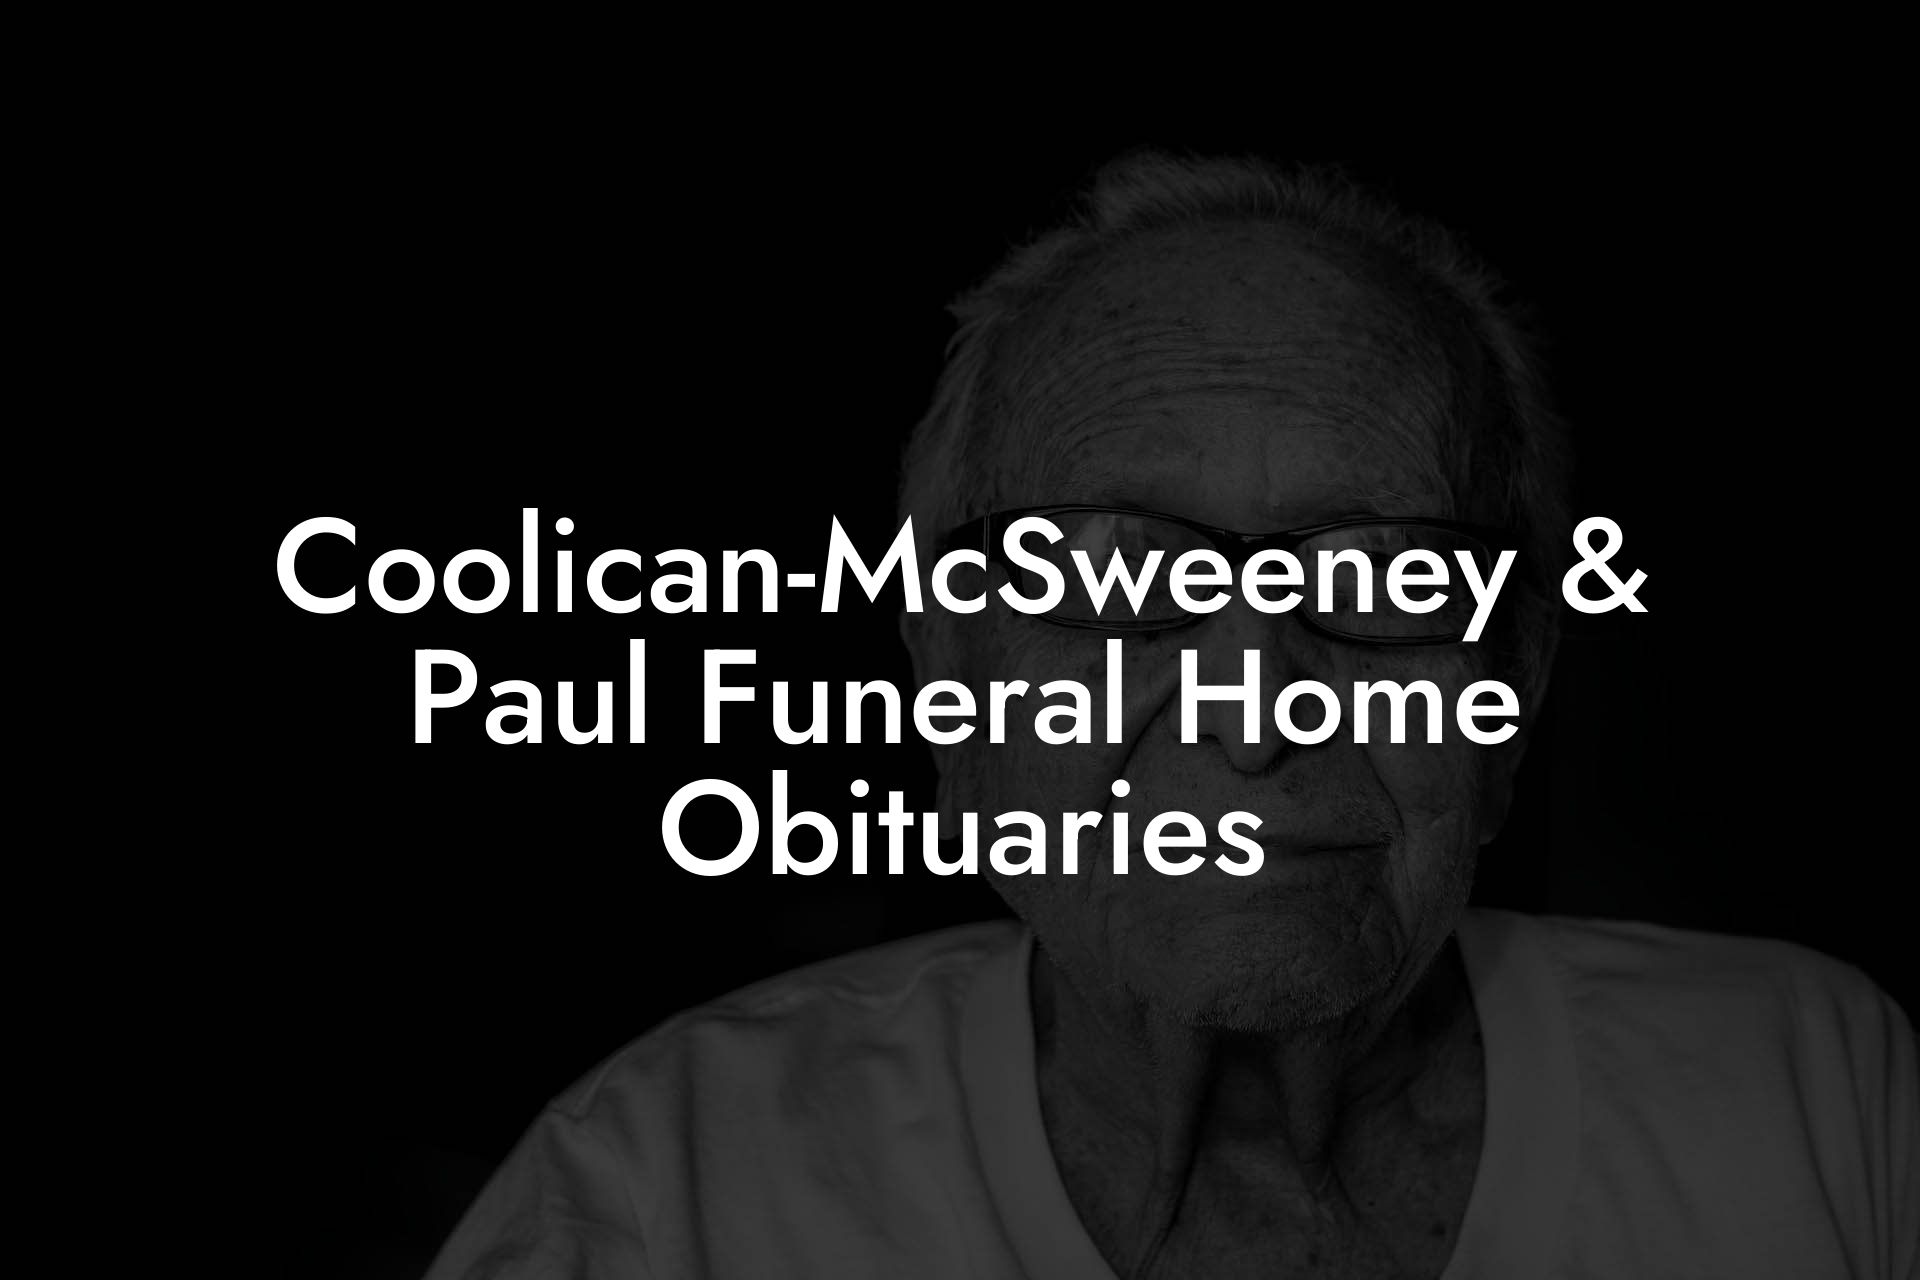 Coolican-McSweeney & Paul Funeral Home Obituaries